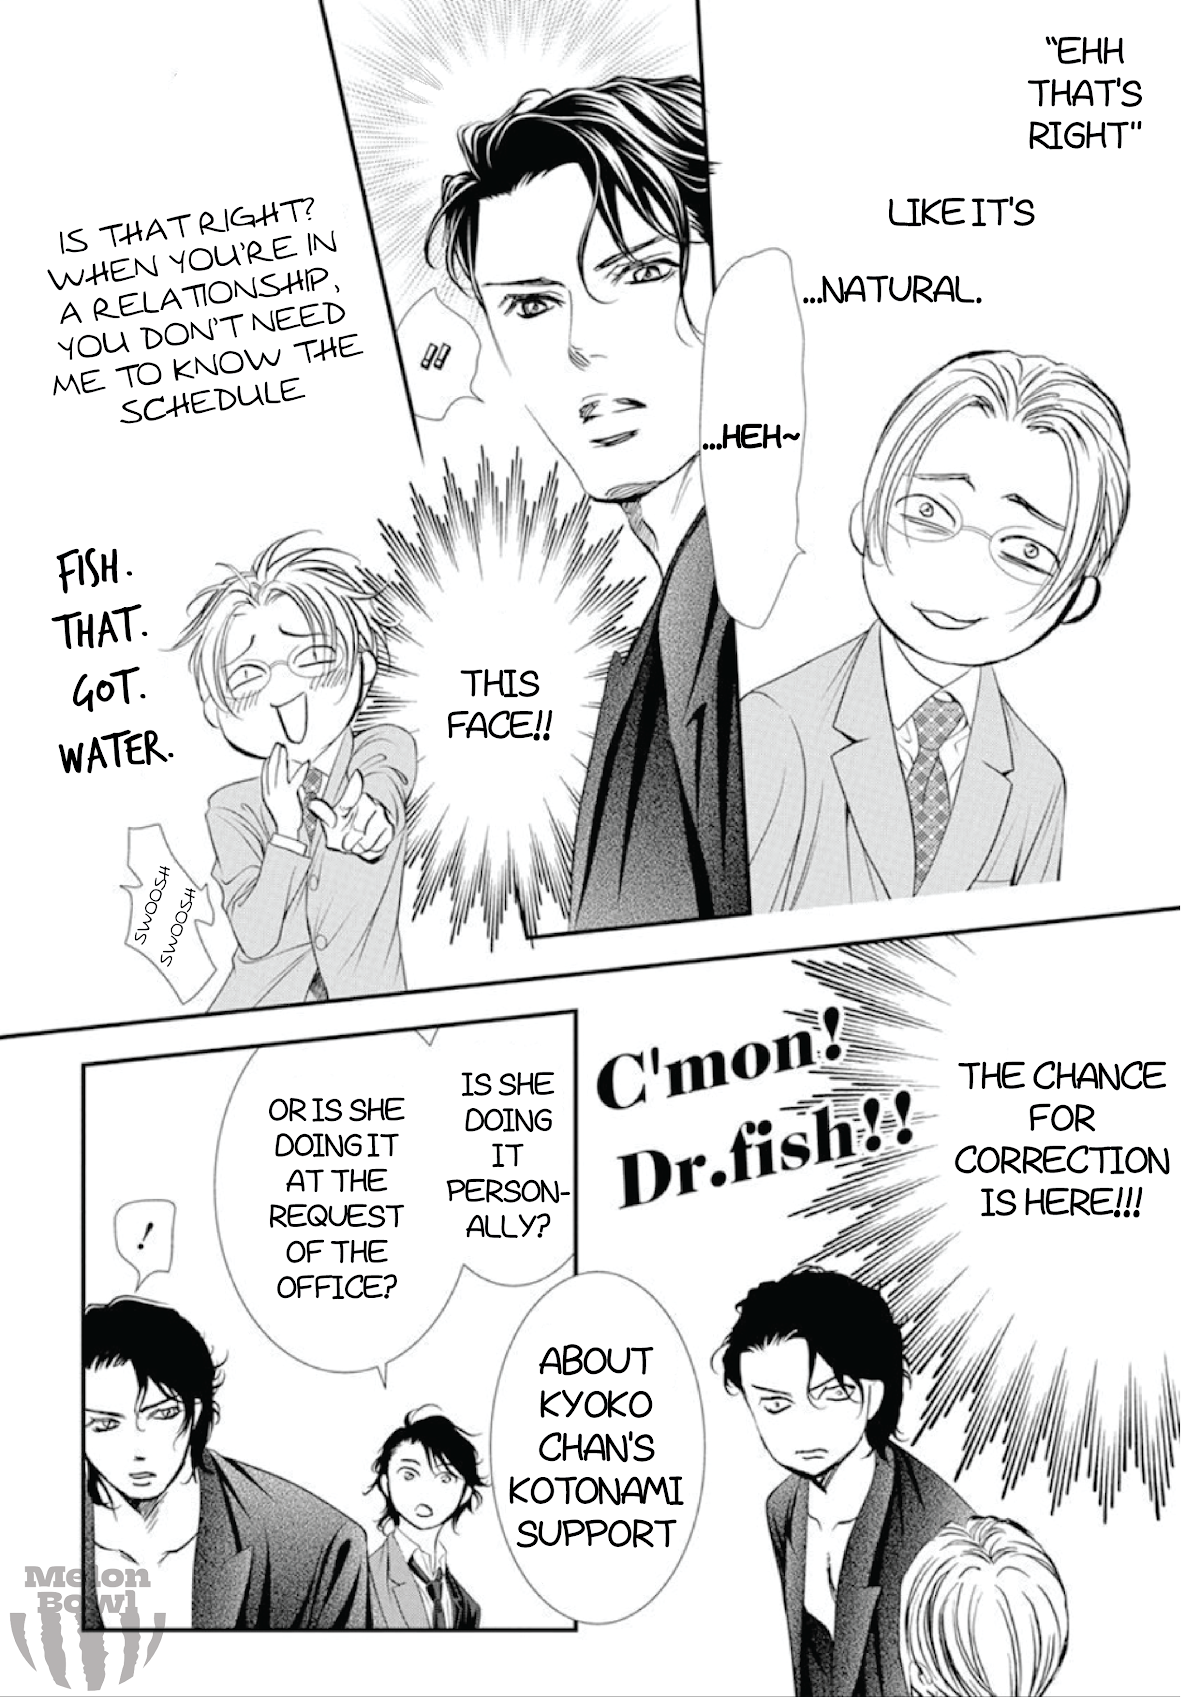 Skip Beat!, Chapter 307 Fairytale Dialogue image 15